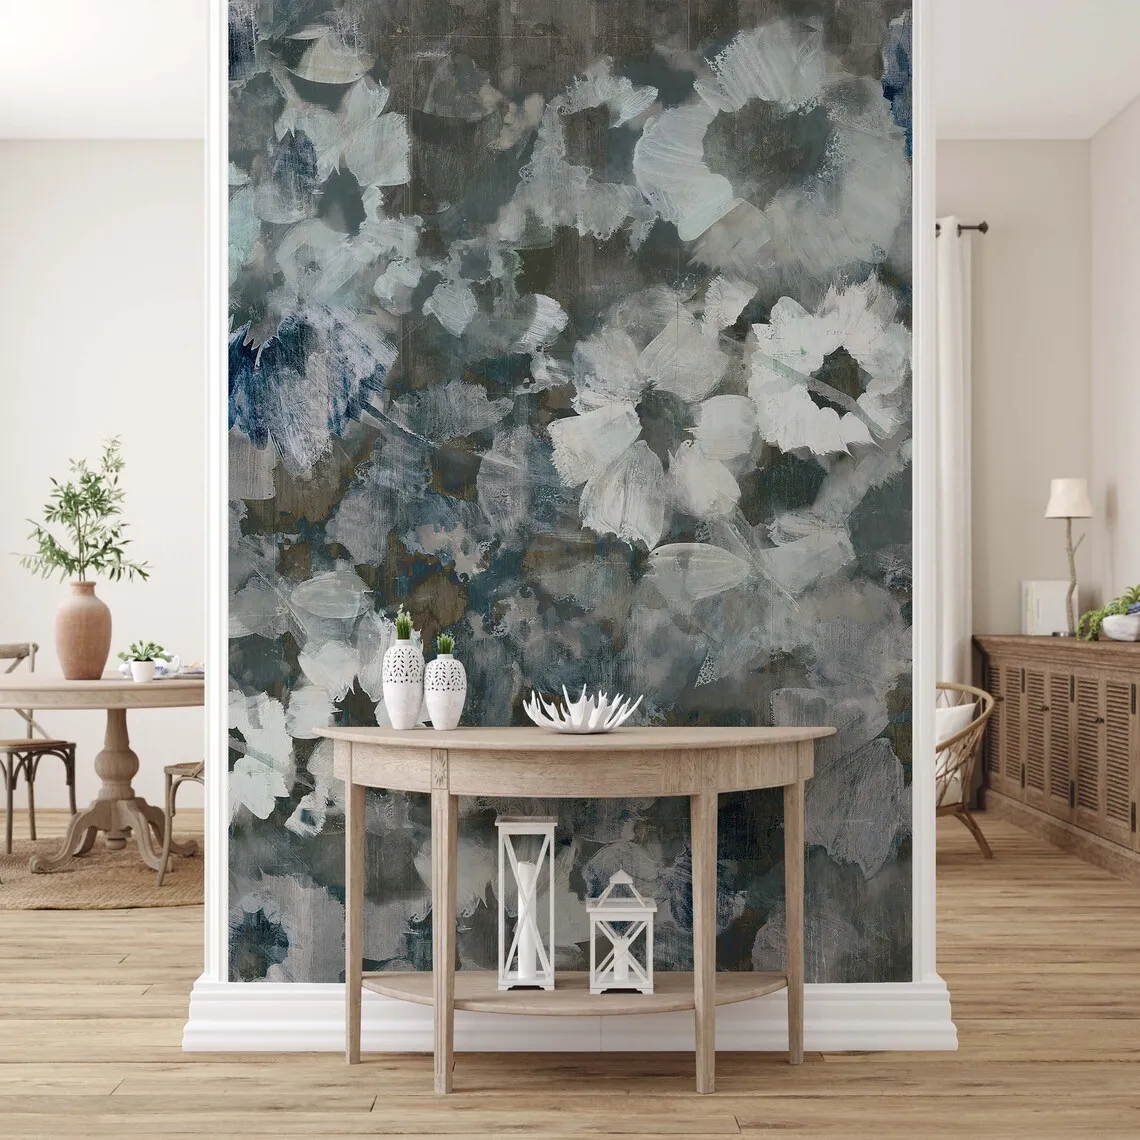 Custom Decorative Floral Self-adhesive Wallpaper Bedroom Wall Murals,Botanic Odorless Peel And Stick Wall Coating for Home Decor